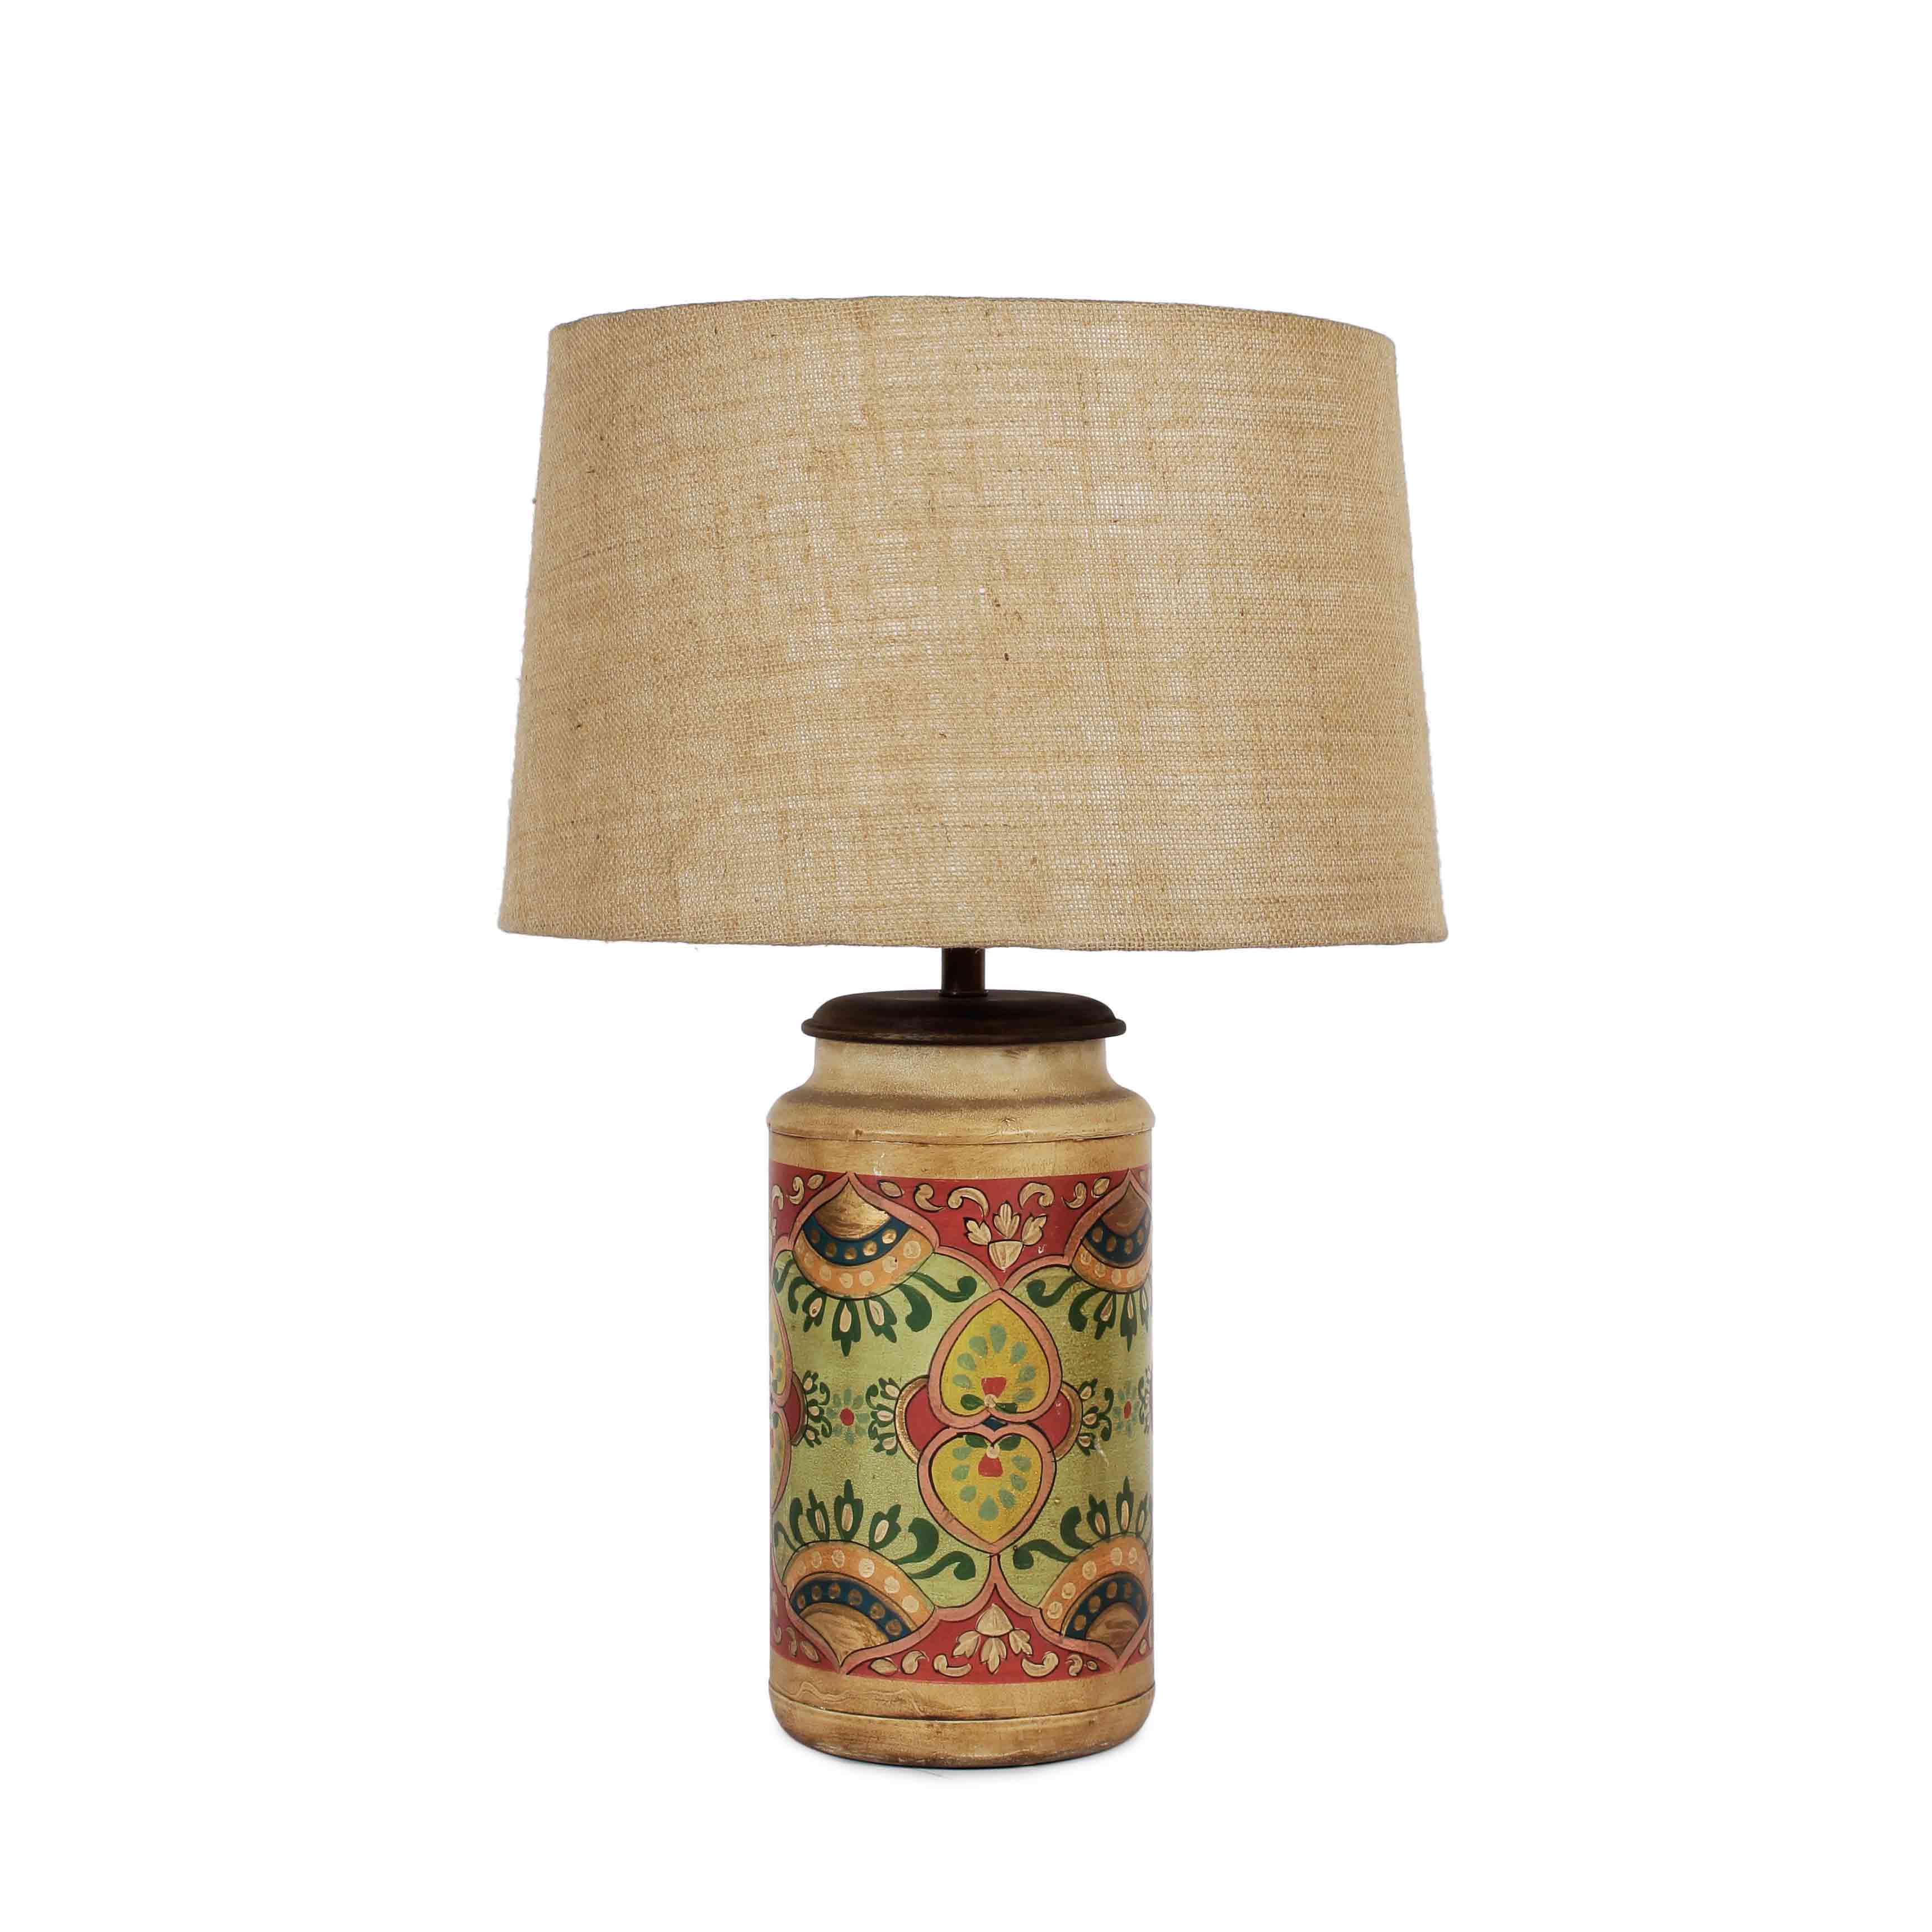 Hand Painted Table Lamp online